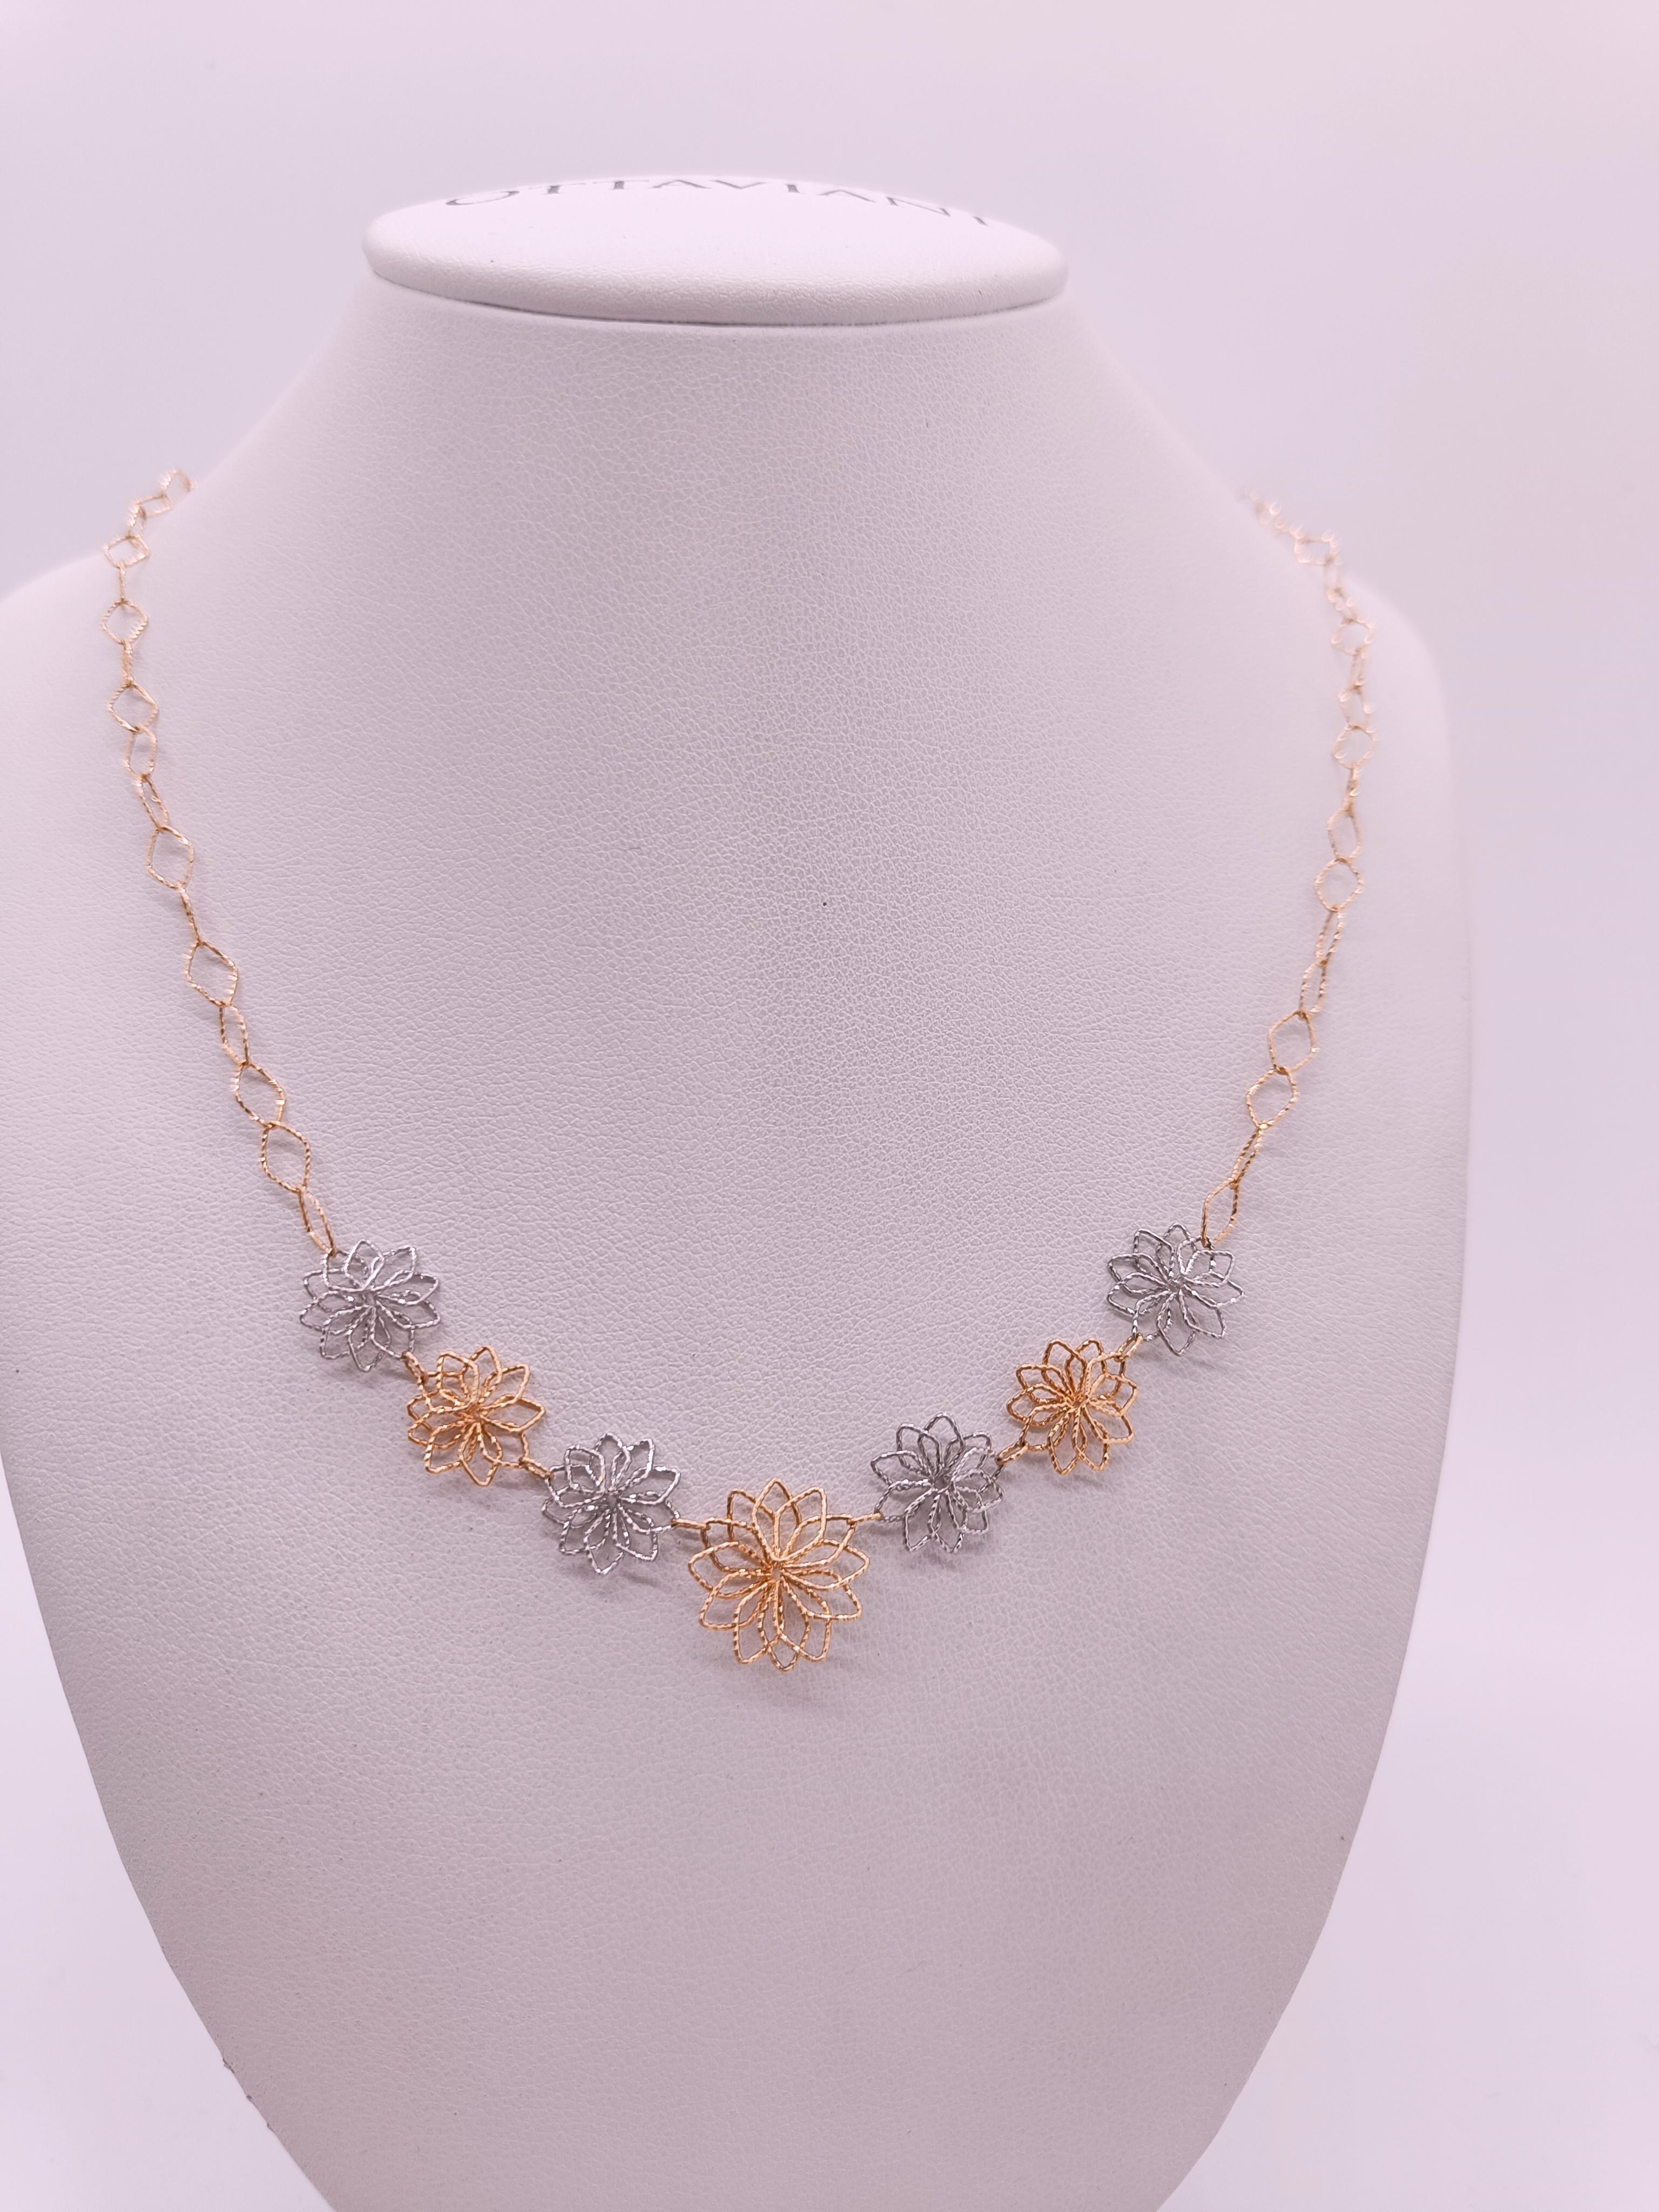 18k Gold mixed yellow and white choker necklace with flower-shaped links chained together.

The special feature of this model is the ability to unhook or add the pendant via a convenient clasp that is imperceptible to the eye.
But among its features